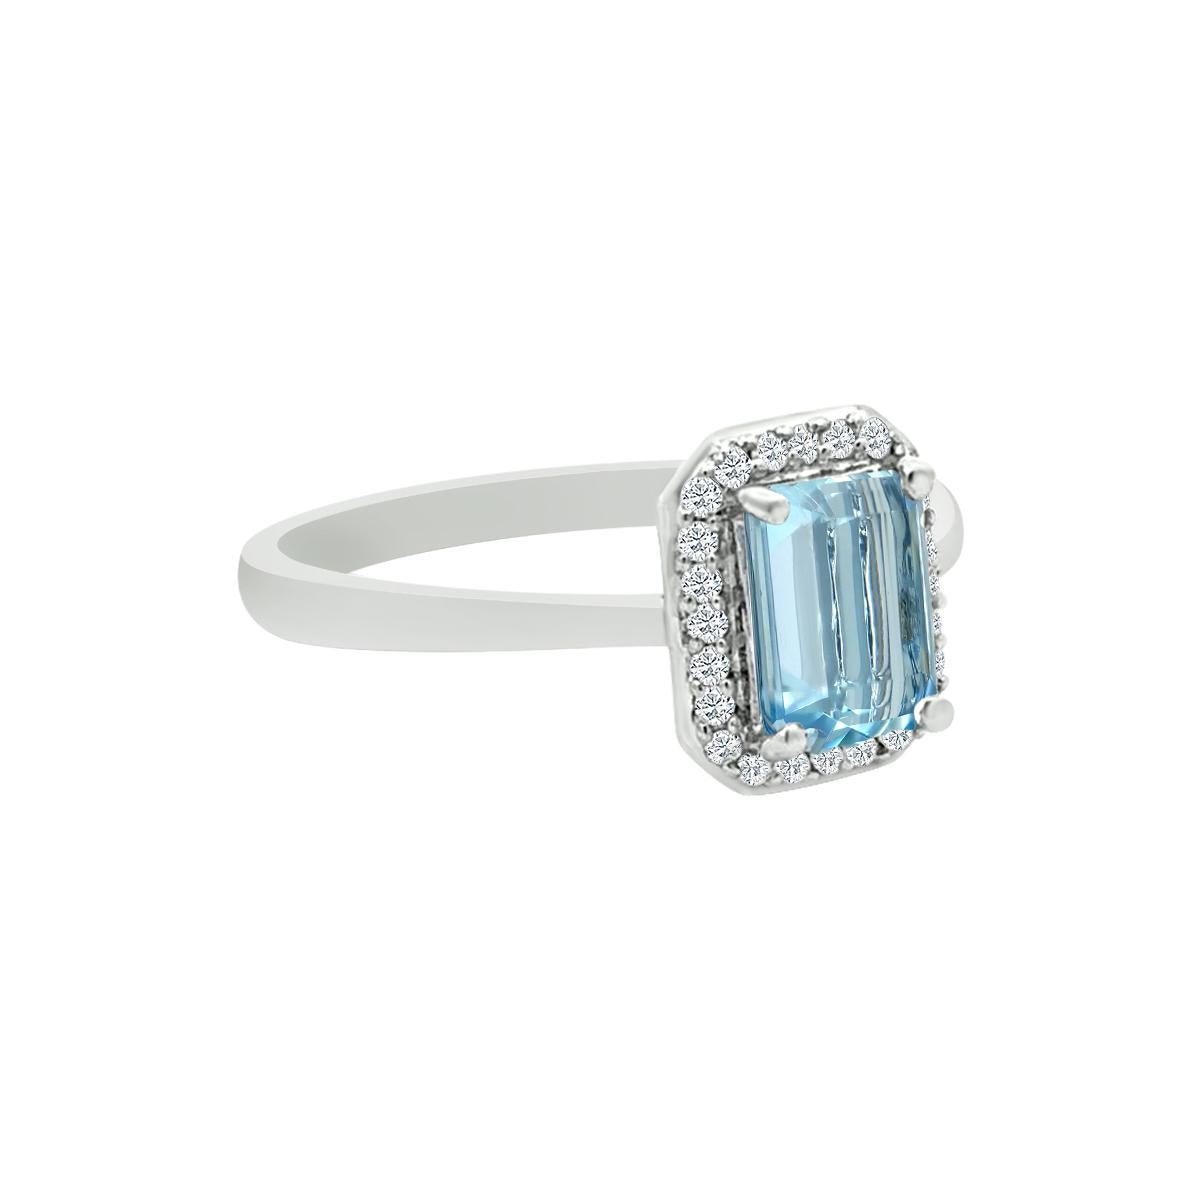 This Stunning Ring Is A combination Of One Of The Most Loved Design With A Beautiful Sustainably Sourced Aquamarine.
The 7X5mm Octagon Shaped Aquamarine Is A Show Stopper In Its Unique Style Settled In 14K White Gold.
This Ring Could Be A perfect